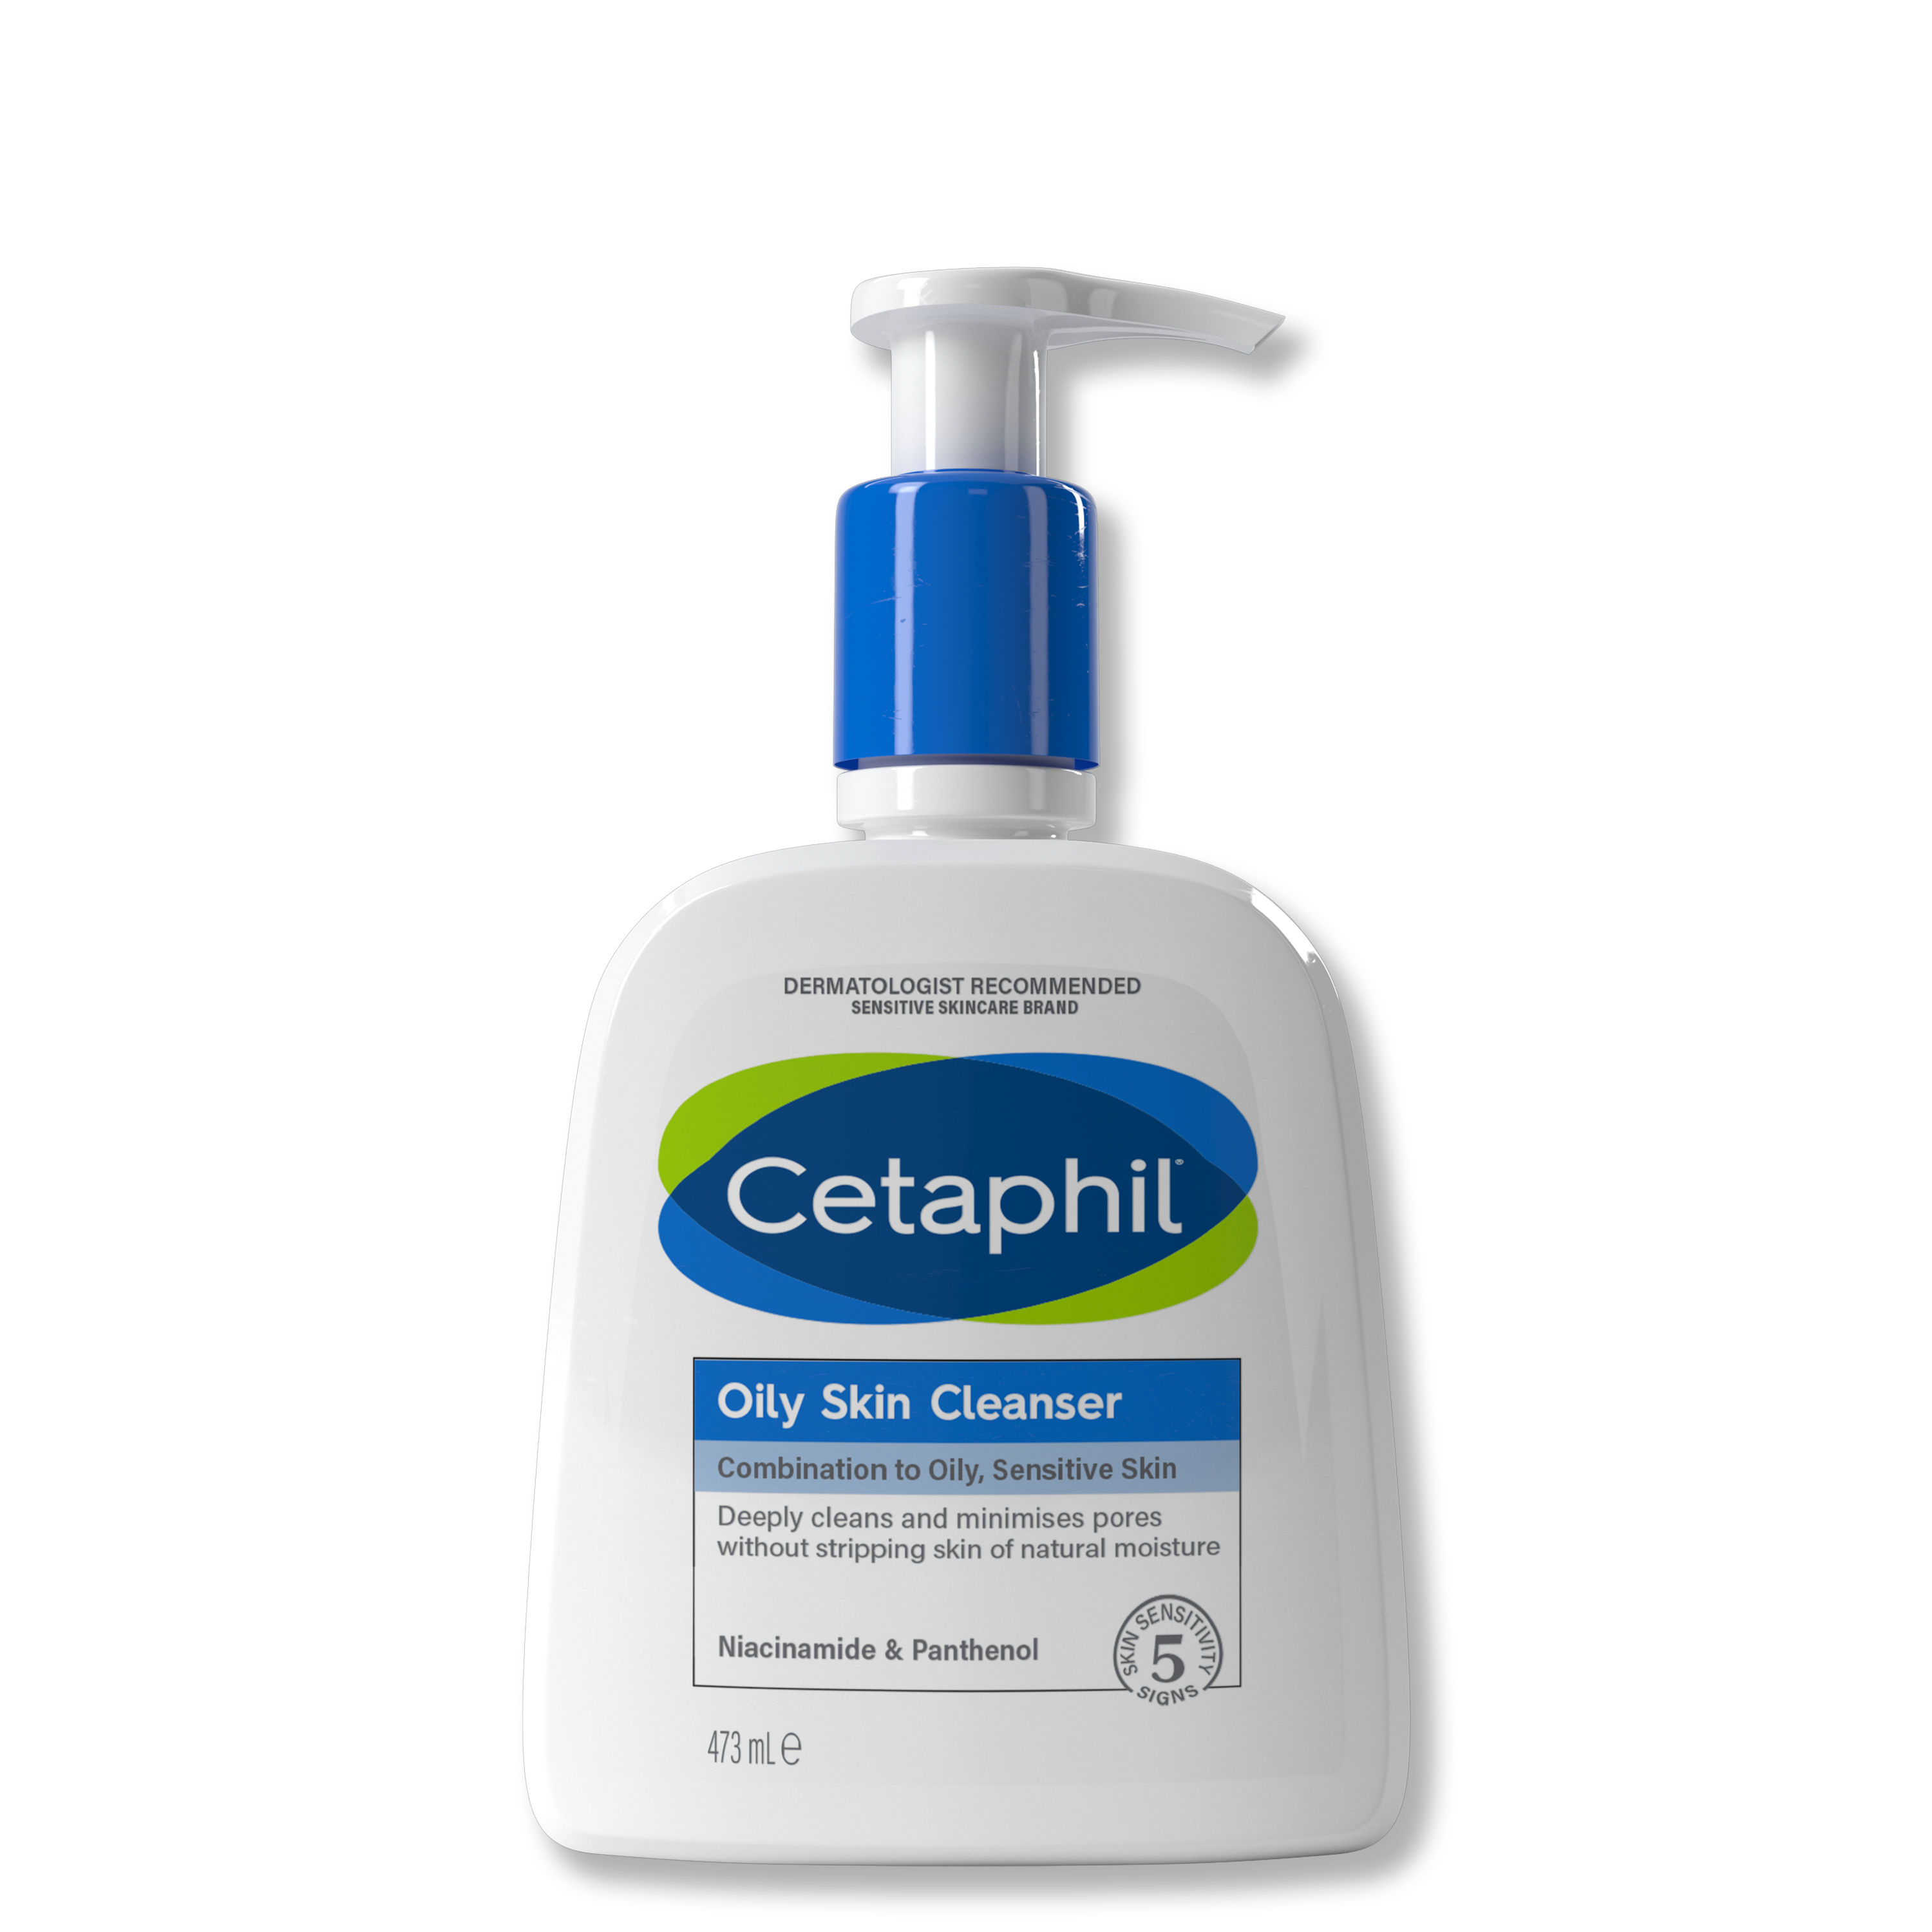 Gentle Foaming Cleanser for Combination, Oily Skin | Cetaphil UK